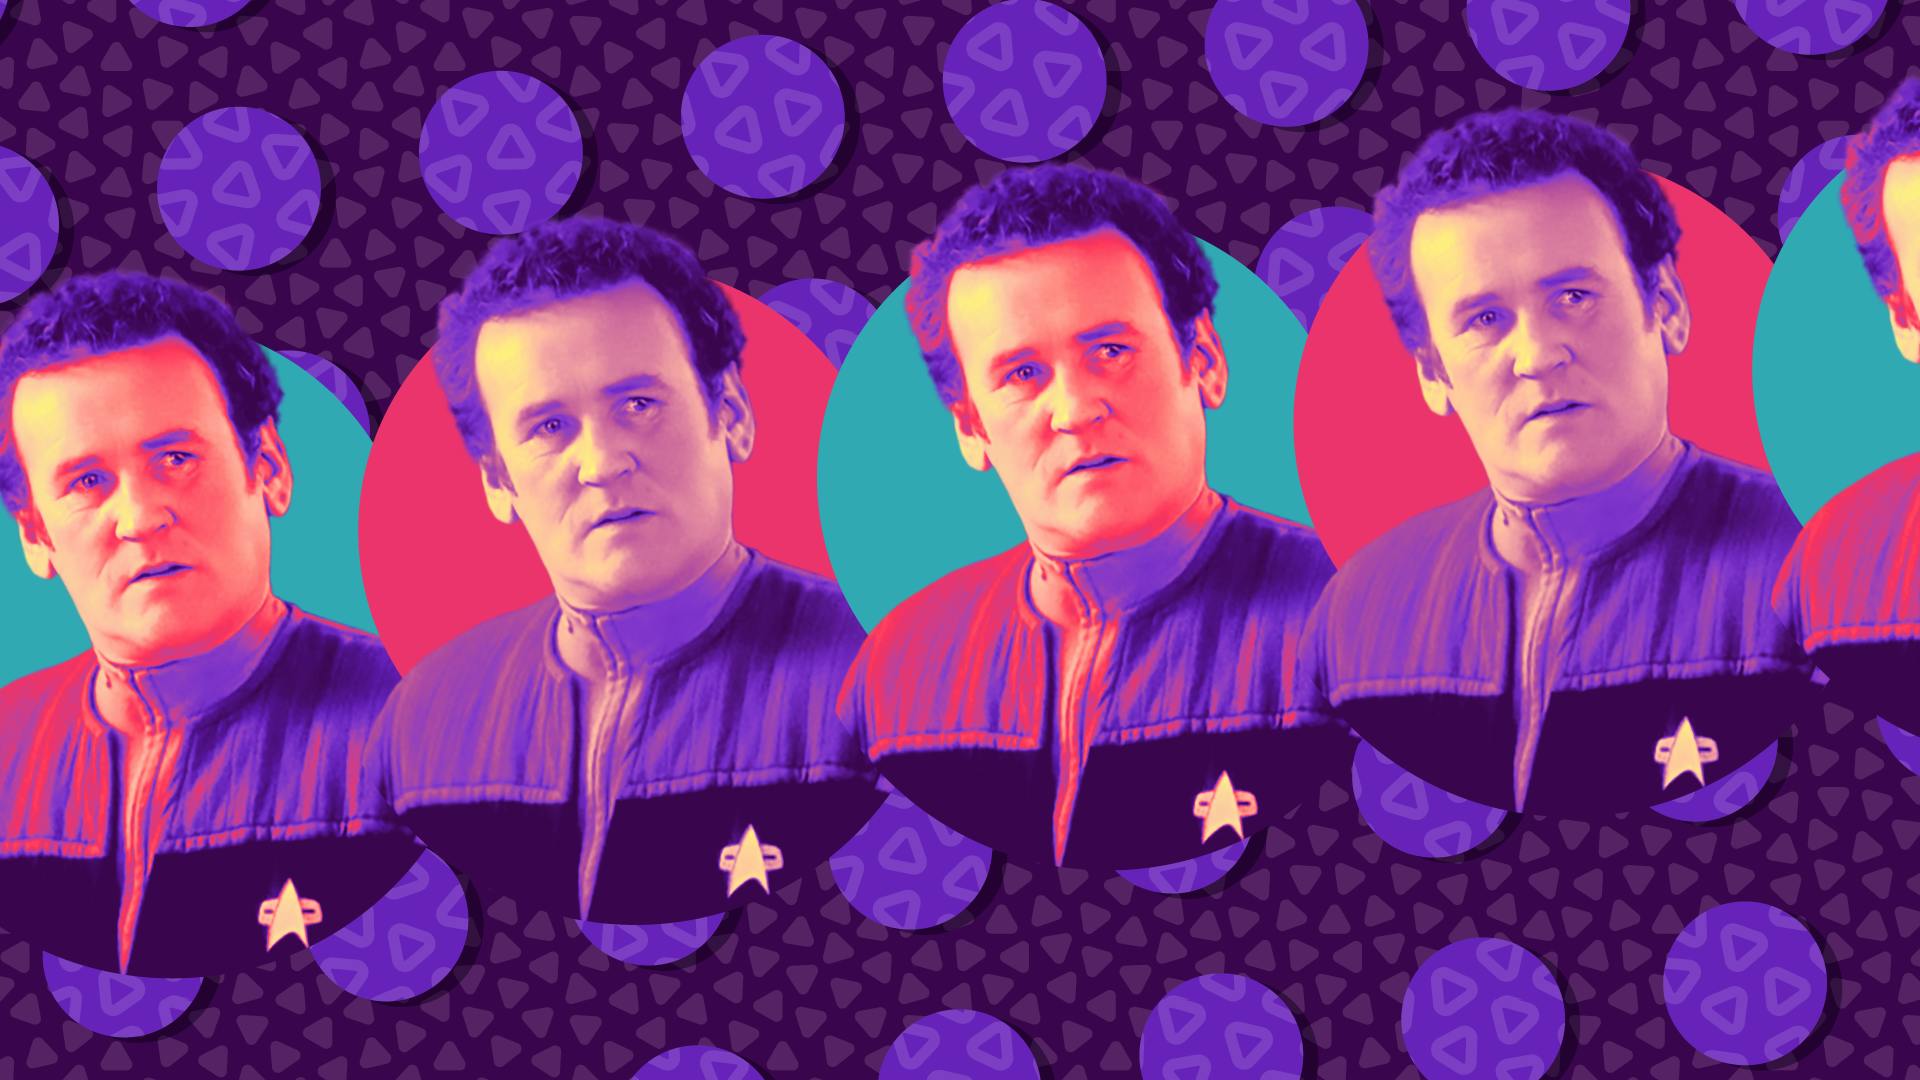 Stylized and repeating portrait of Miles O'Brien